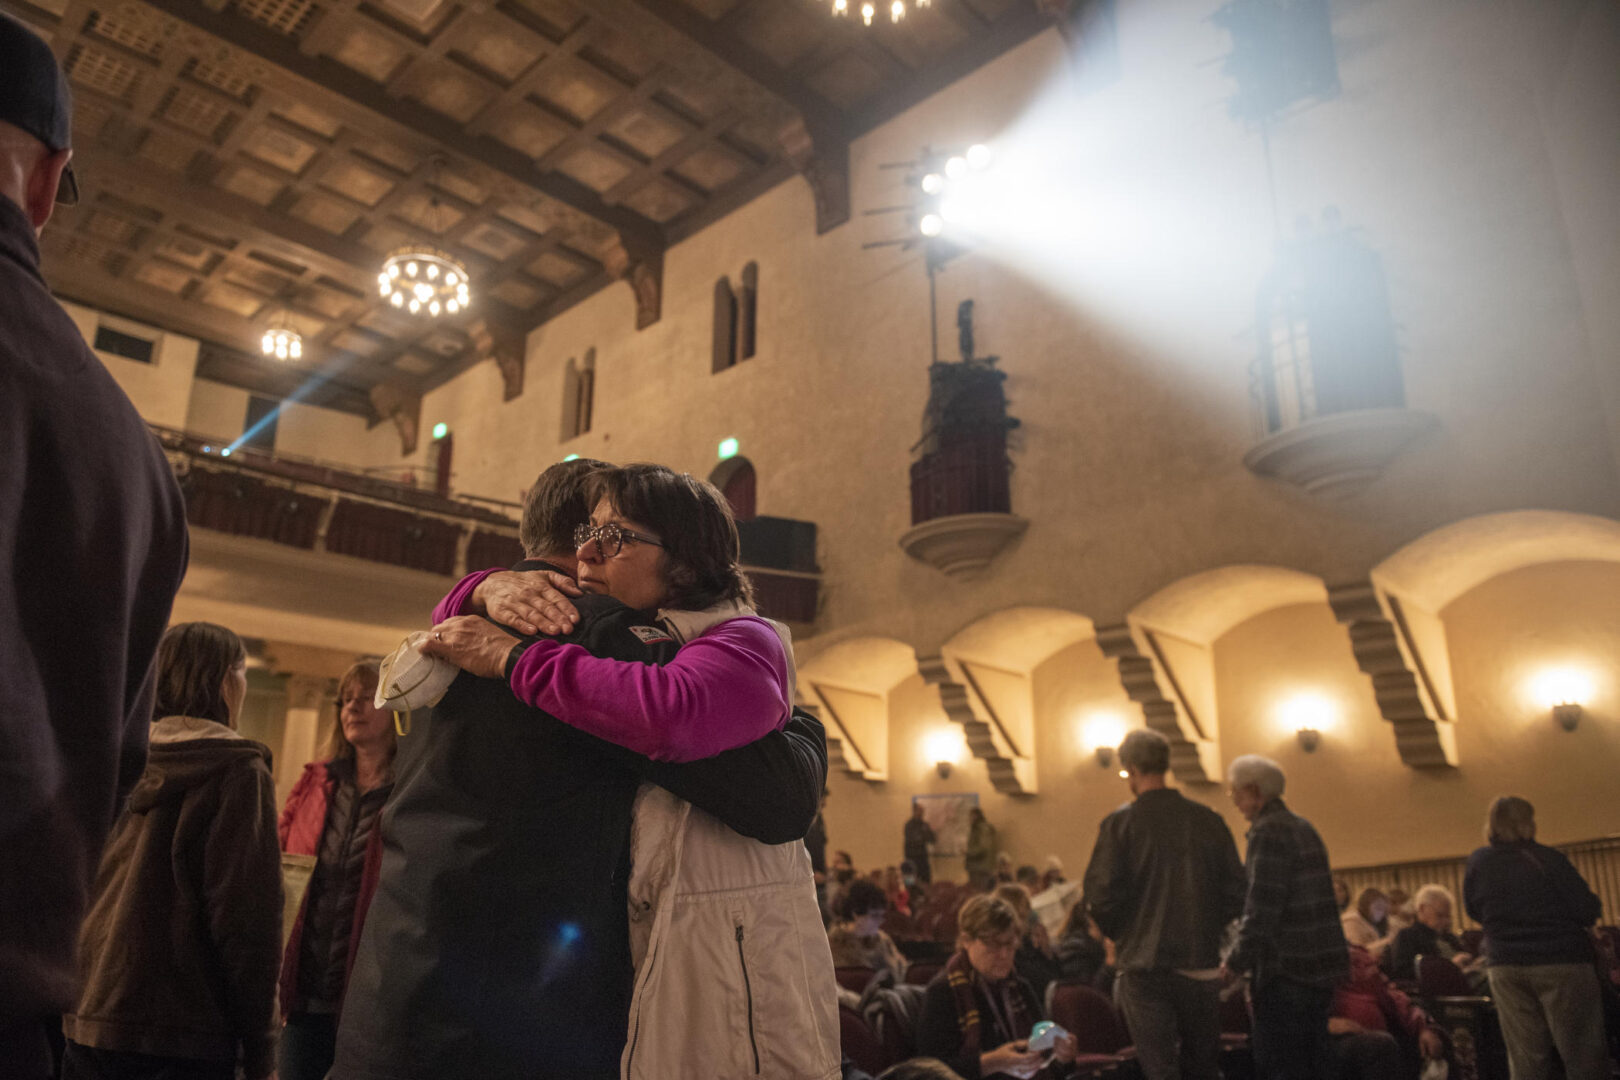 Gayle Hutchinson hugs an individual in the Laxson Auditorium after a community meeting was held two days after the Camp Fire.